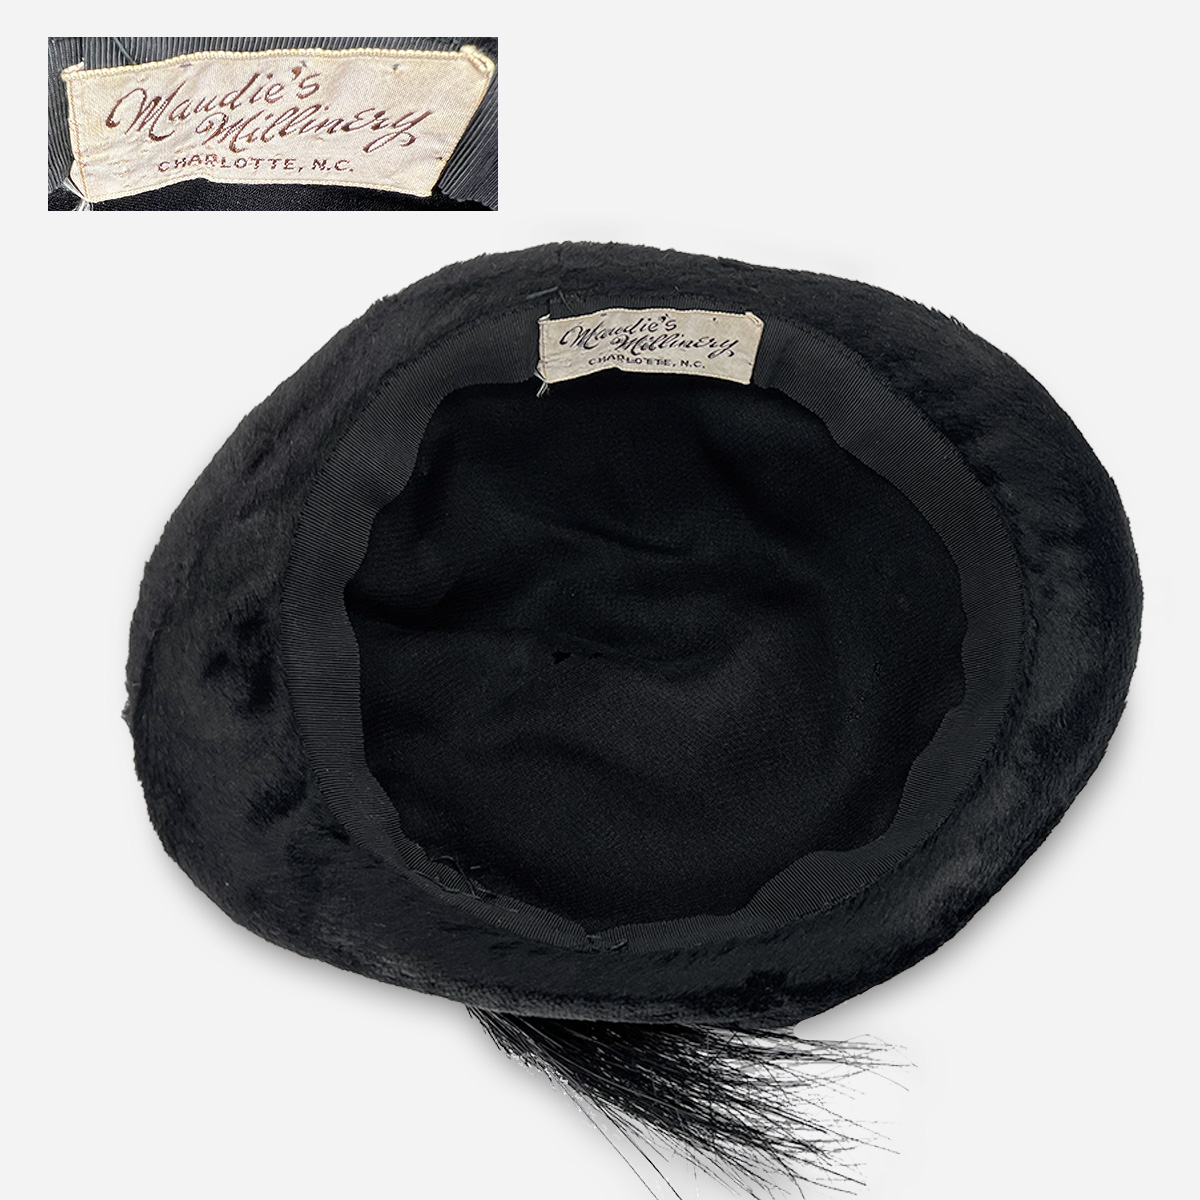 Maudie's millinery hat